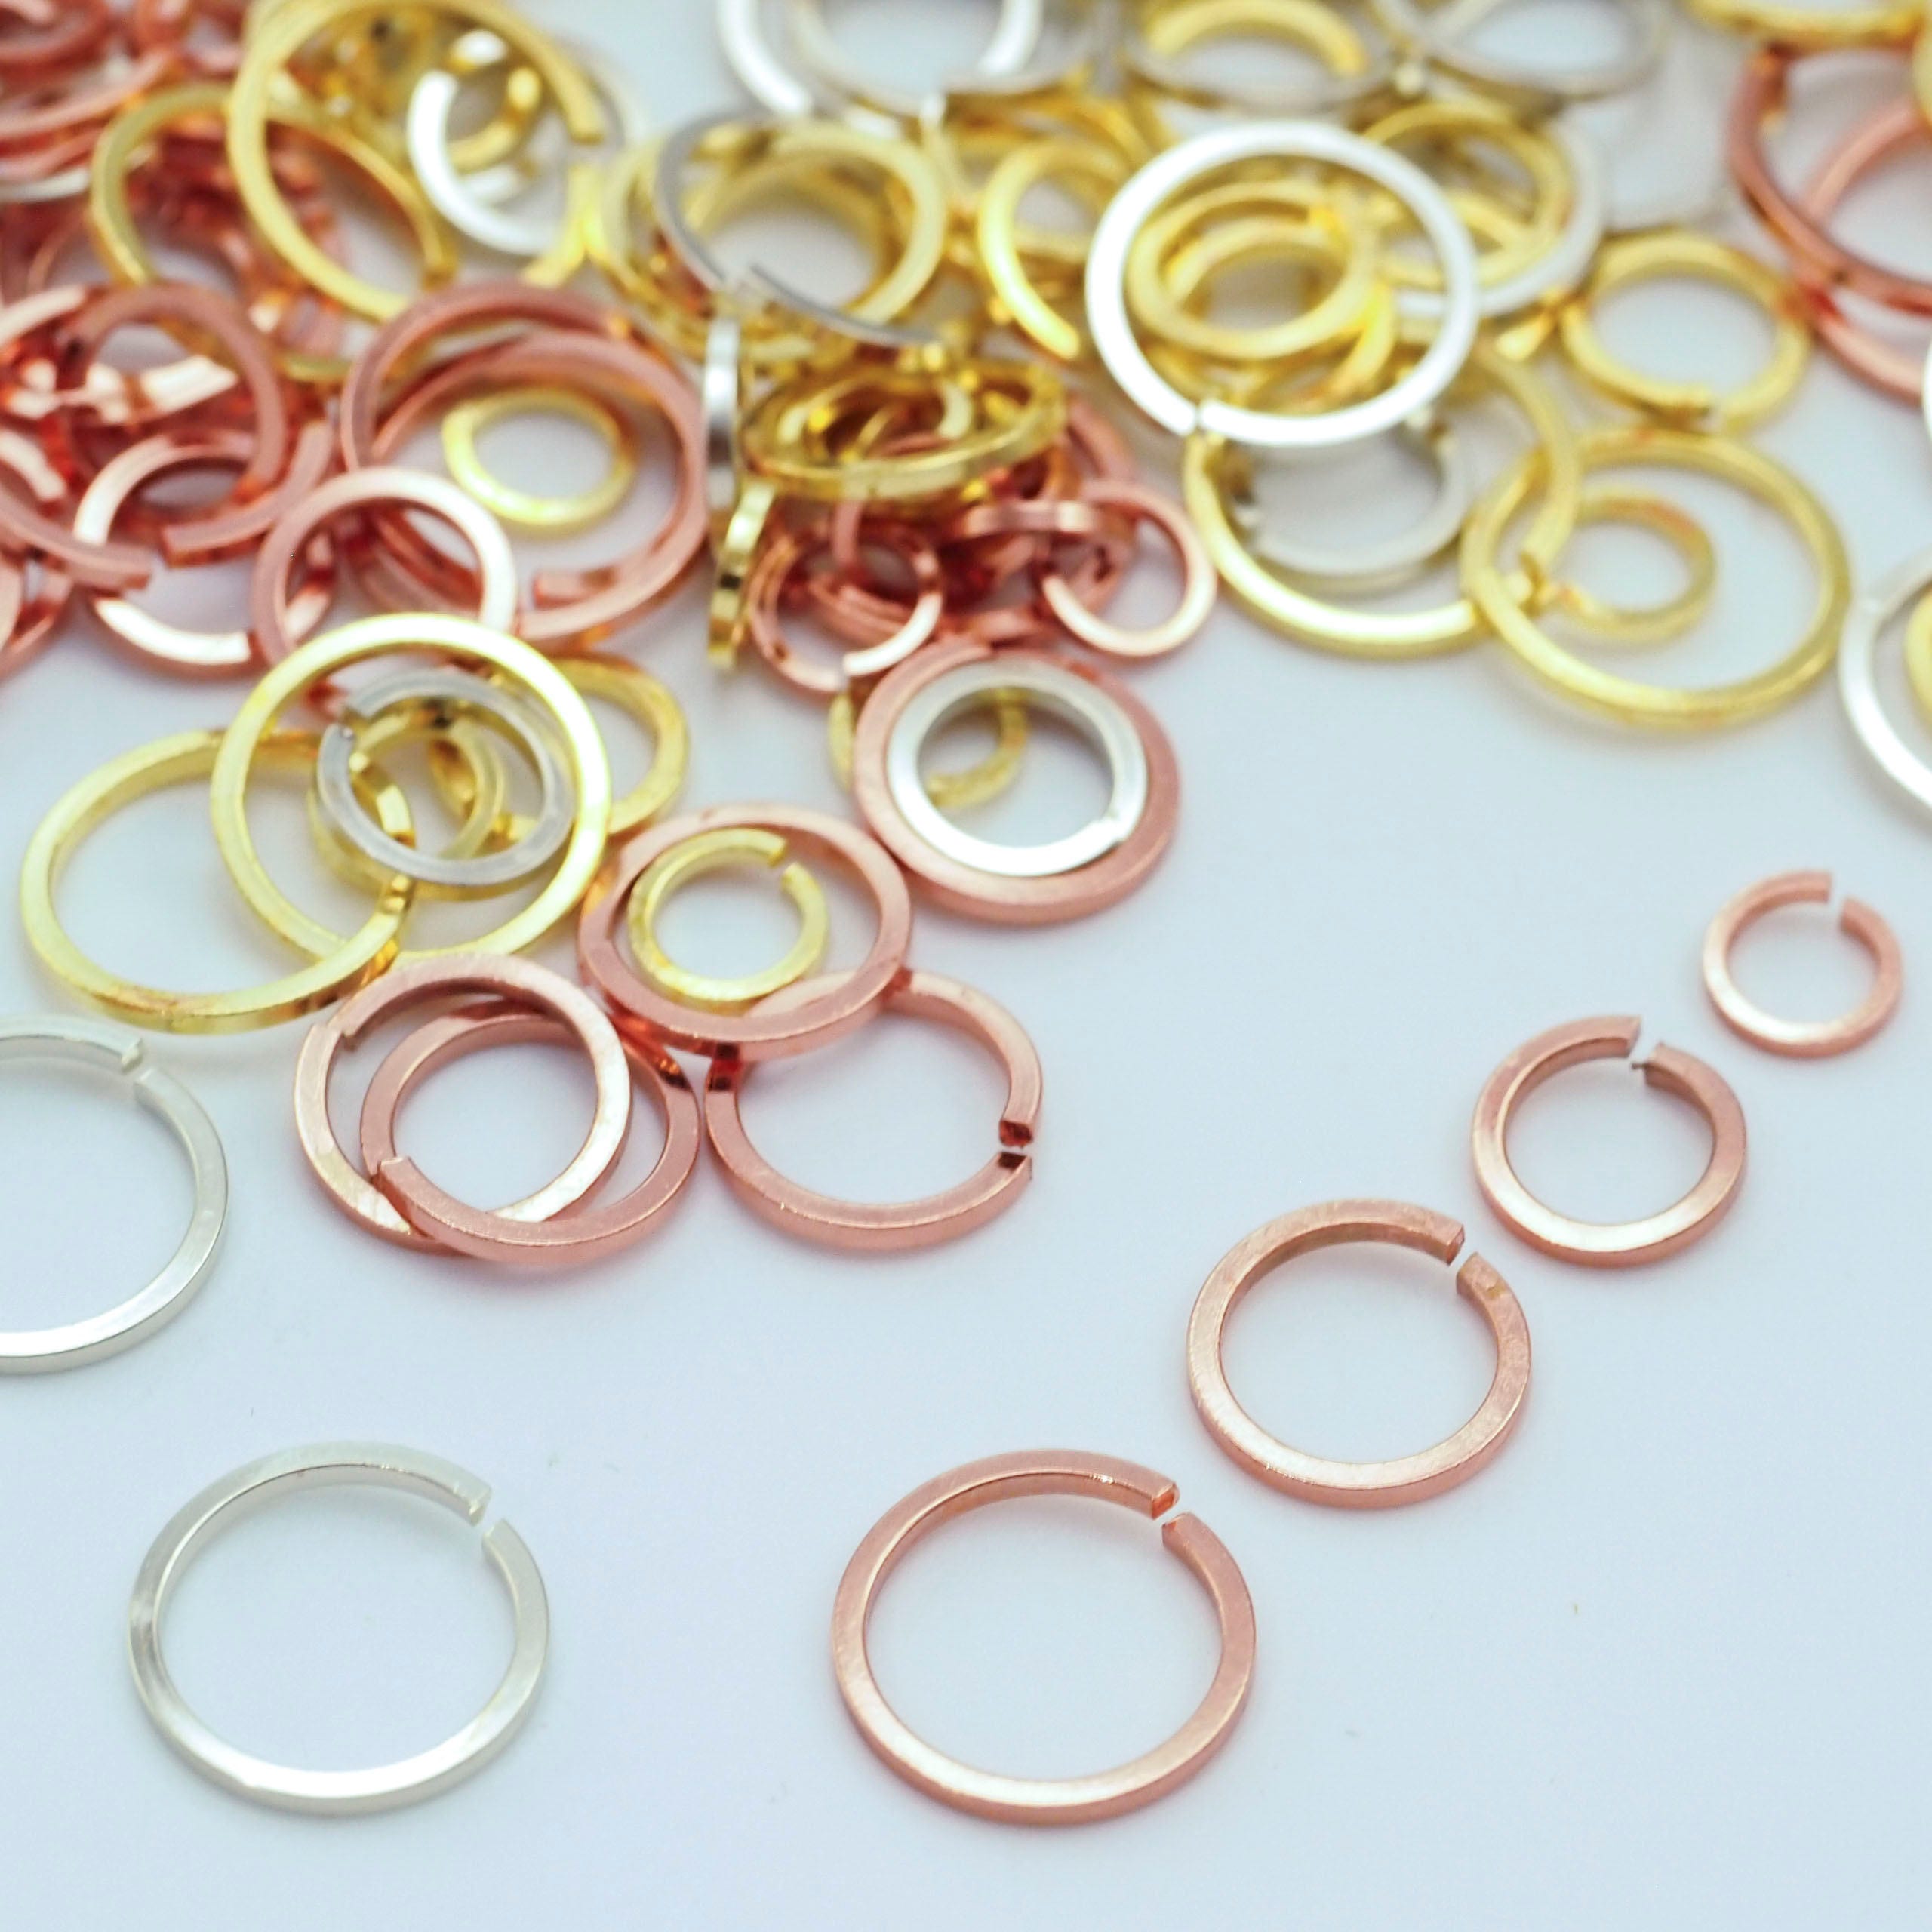 8mm/18g Jump Rings- Antique Copper